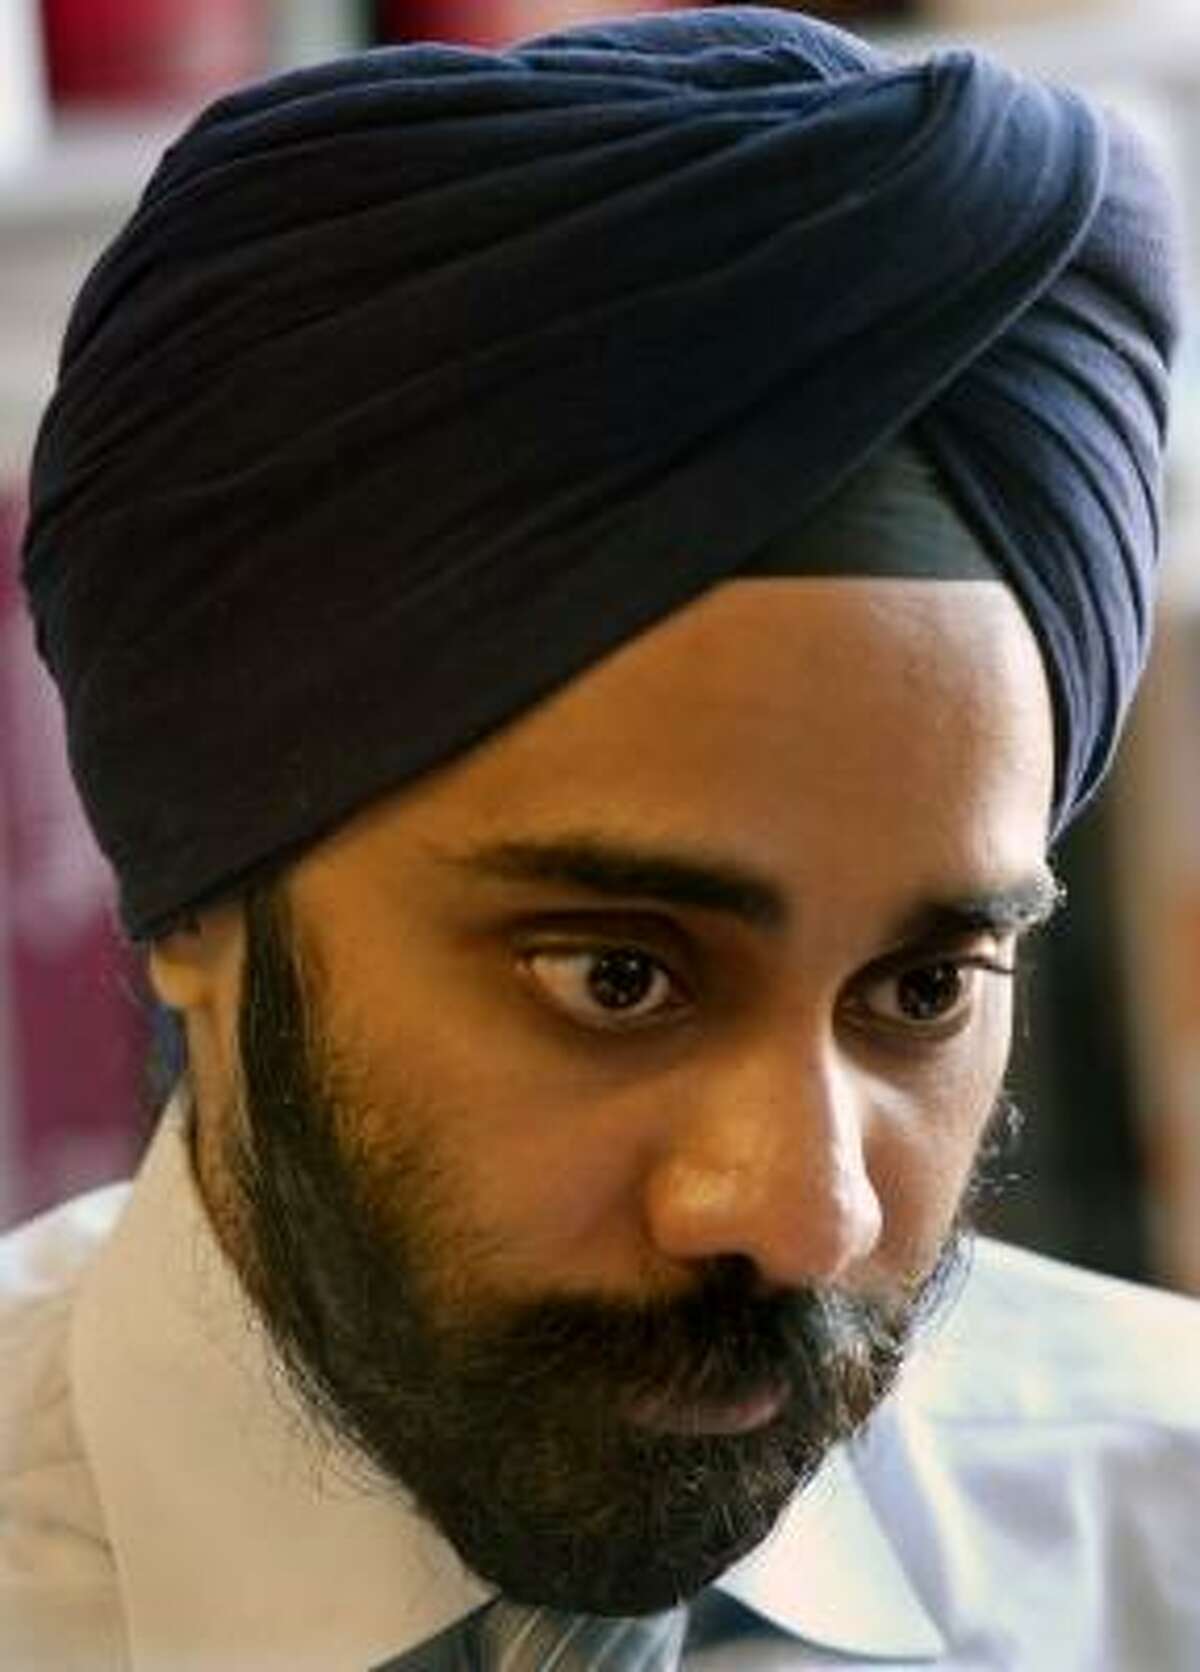 Amardeep Singh, executive director of the Sikh Coalition, says targeting all turban-wearing Sikhs is wrong.